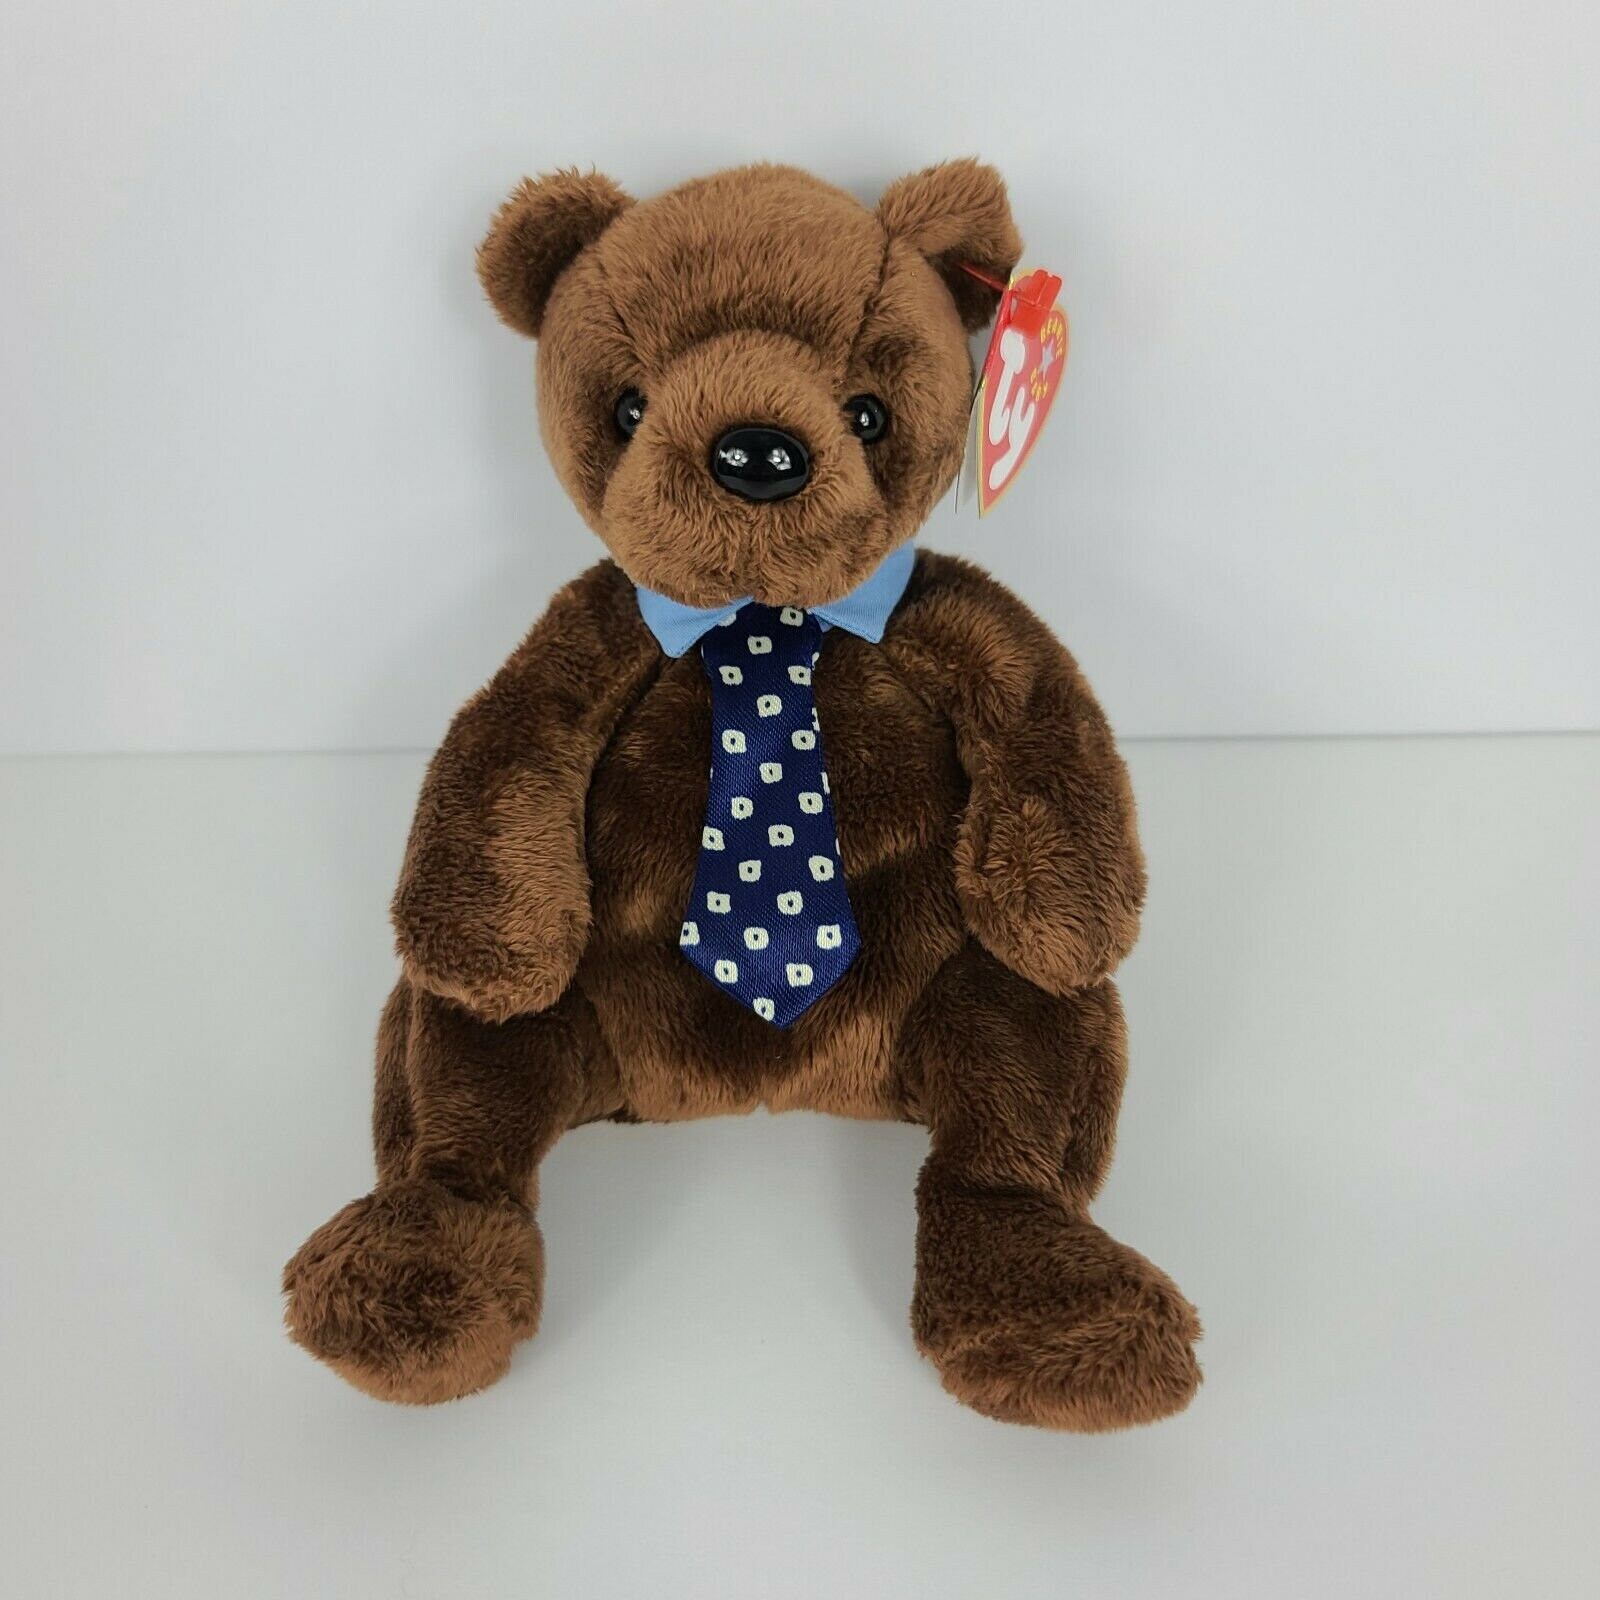 Details about   Ty Beanie Baby Plush America Bear 8" 2001 Stuffed Animal Toy 